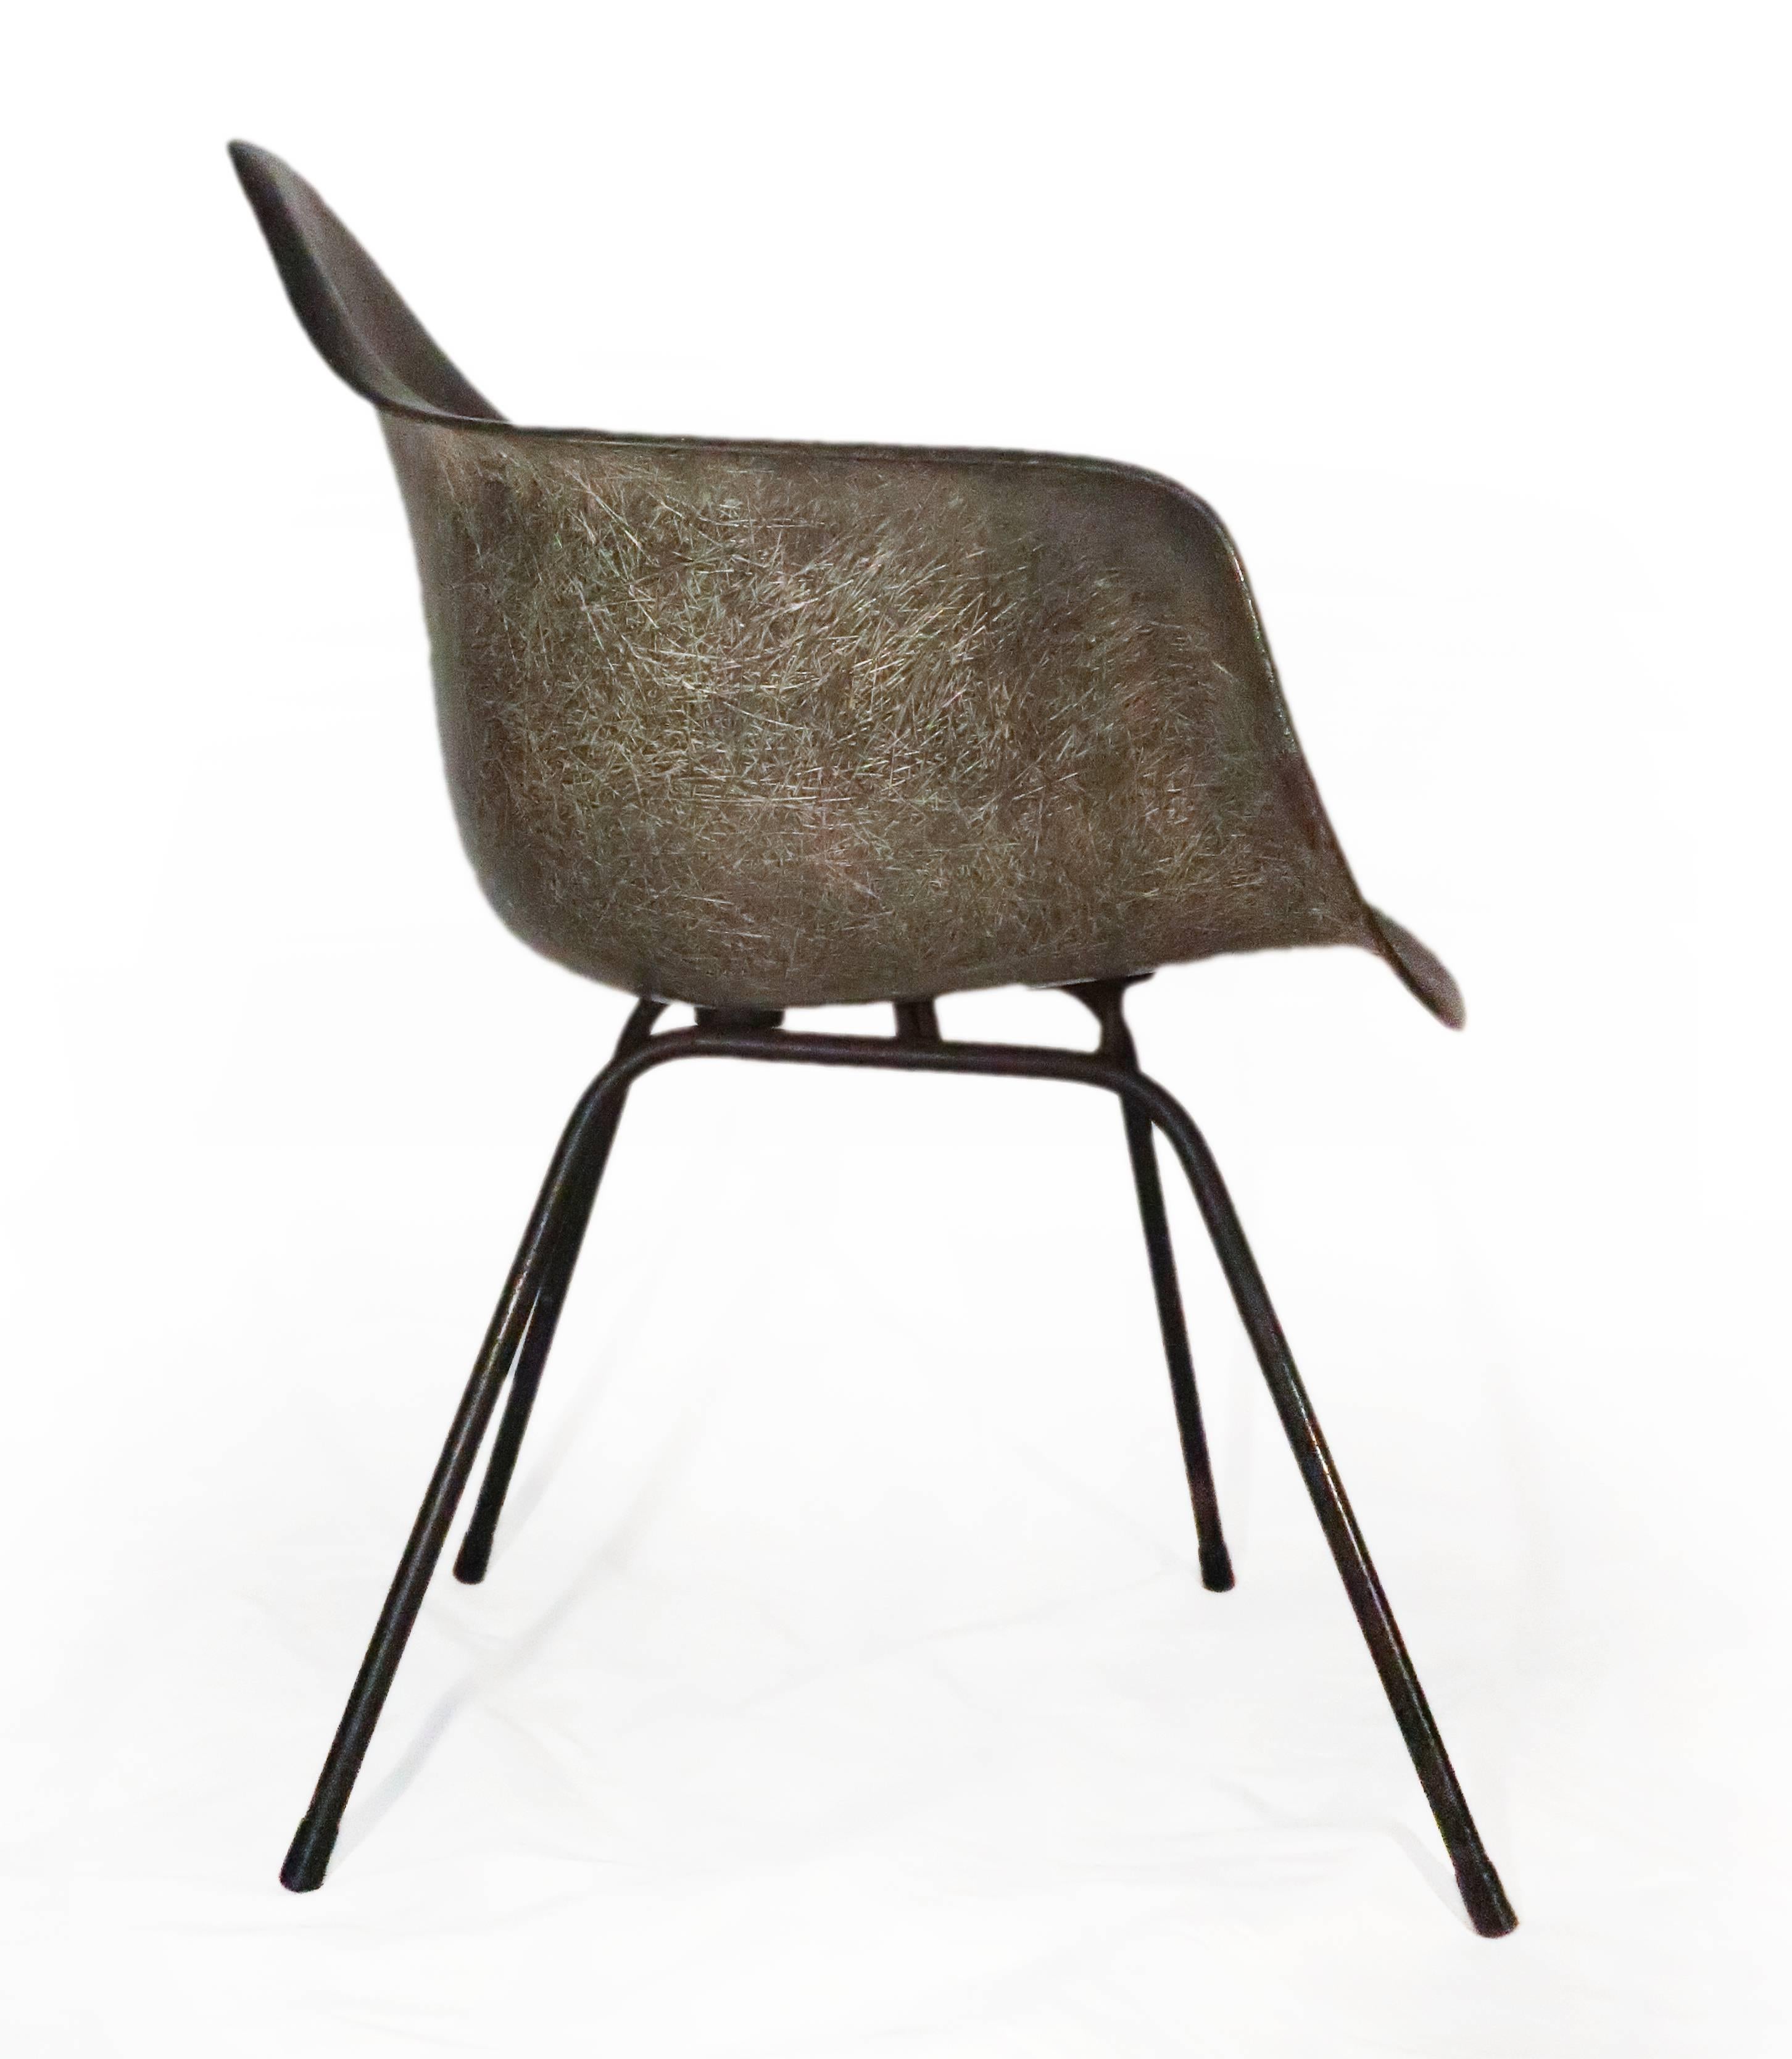 The DAX fiberglass molded chair is exemplary of Charles & Ray Eames’ iterative process. With each new form, finish, and configuration, the Eameses continued to push the boundaries of what the shell chair could be and the applications and